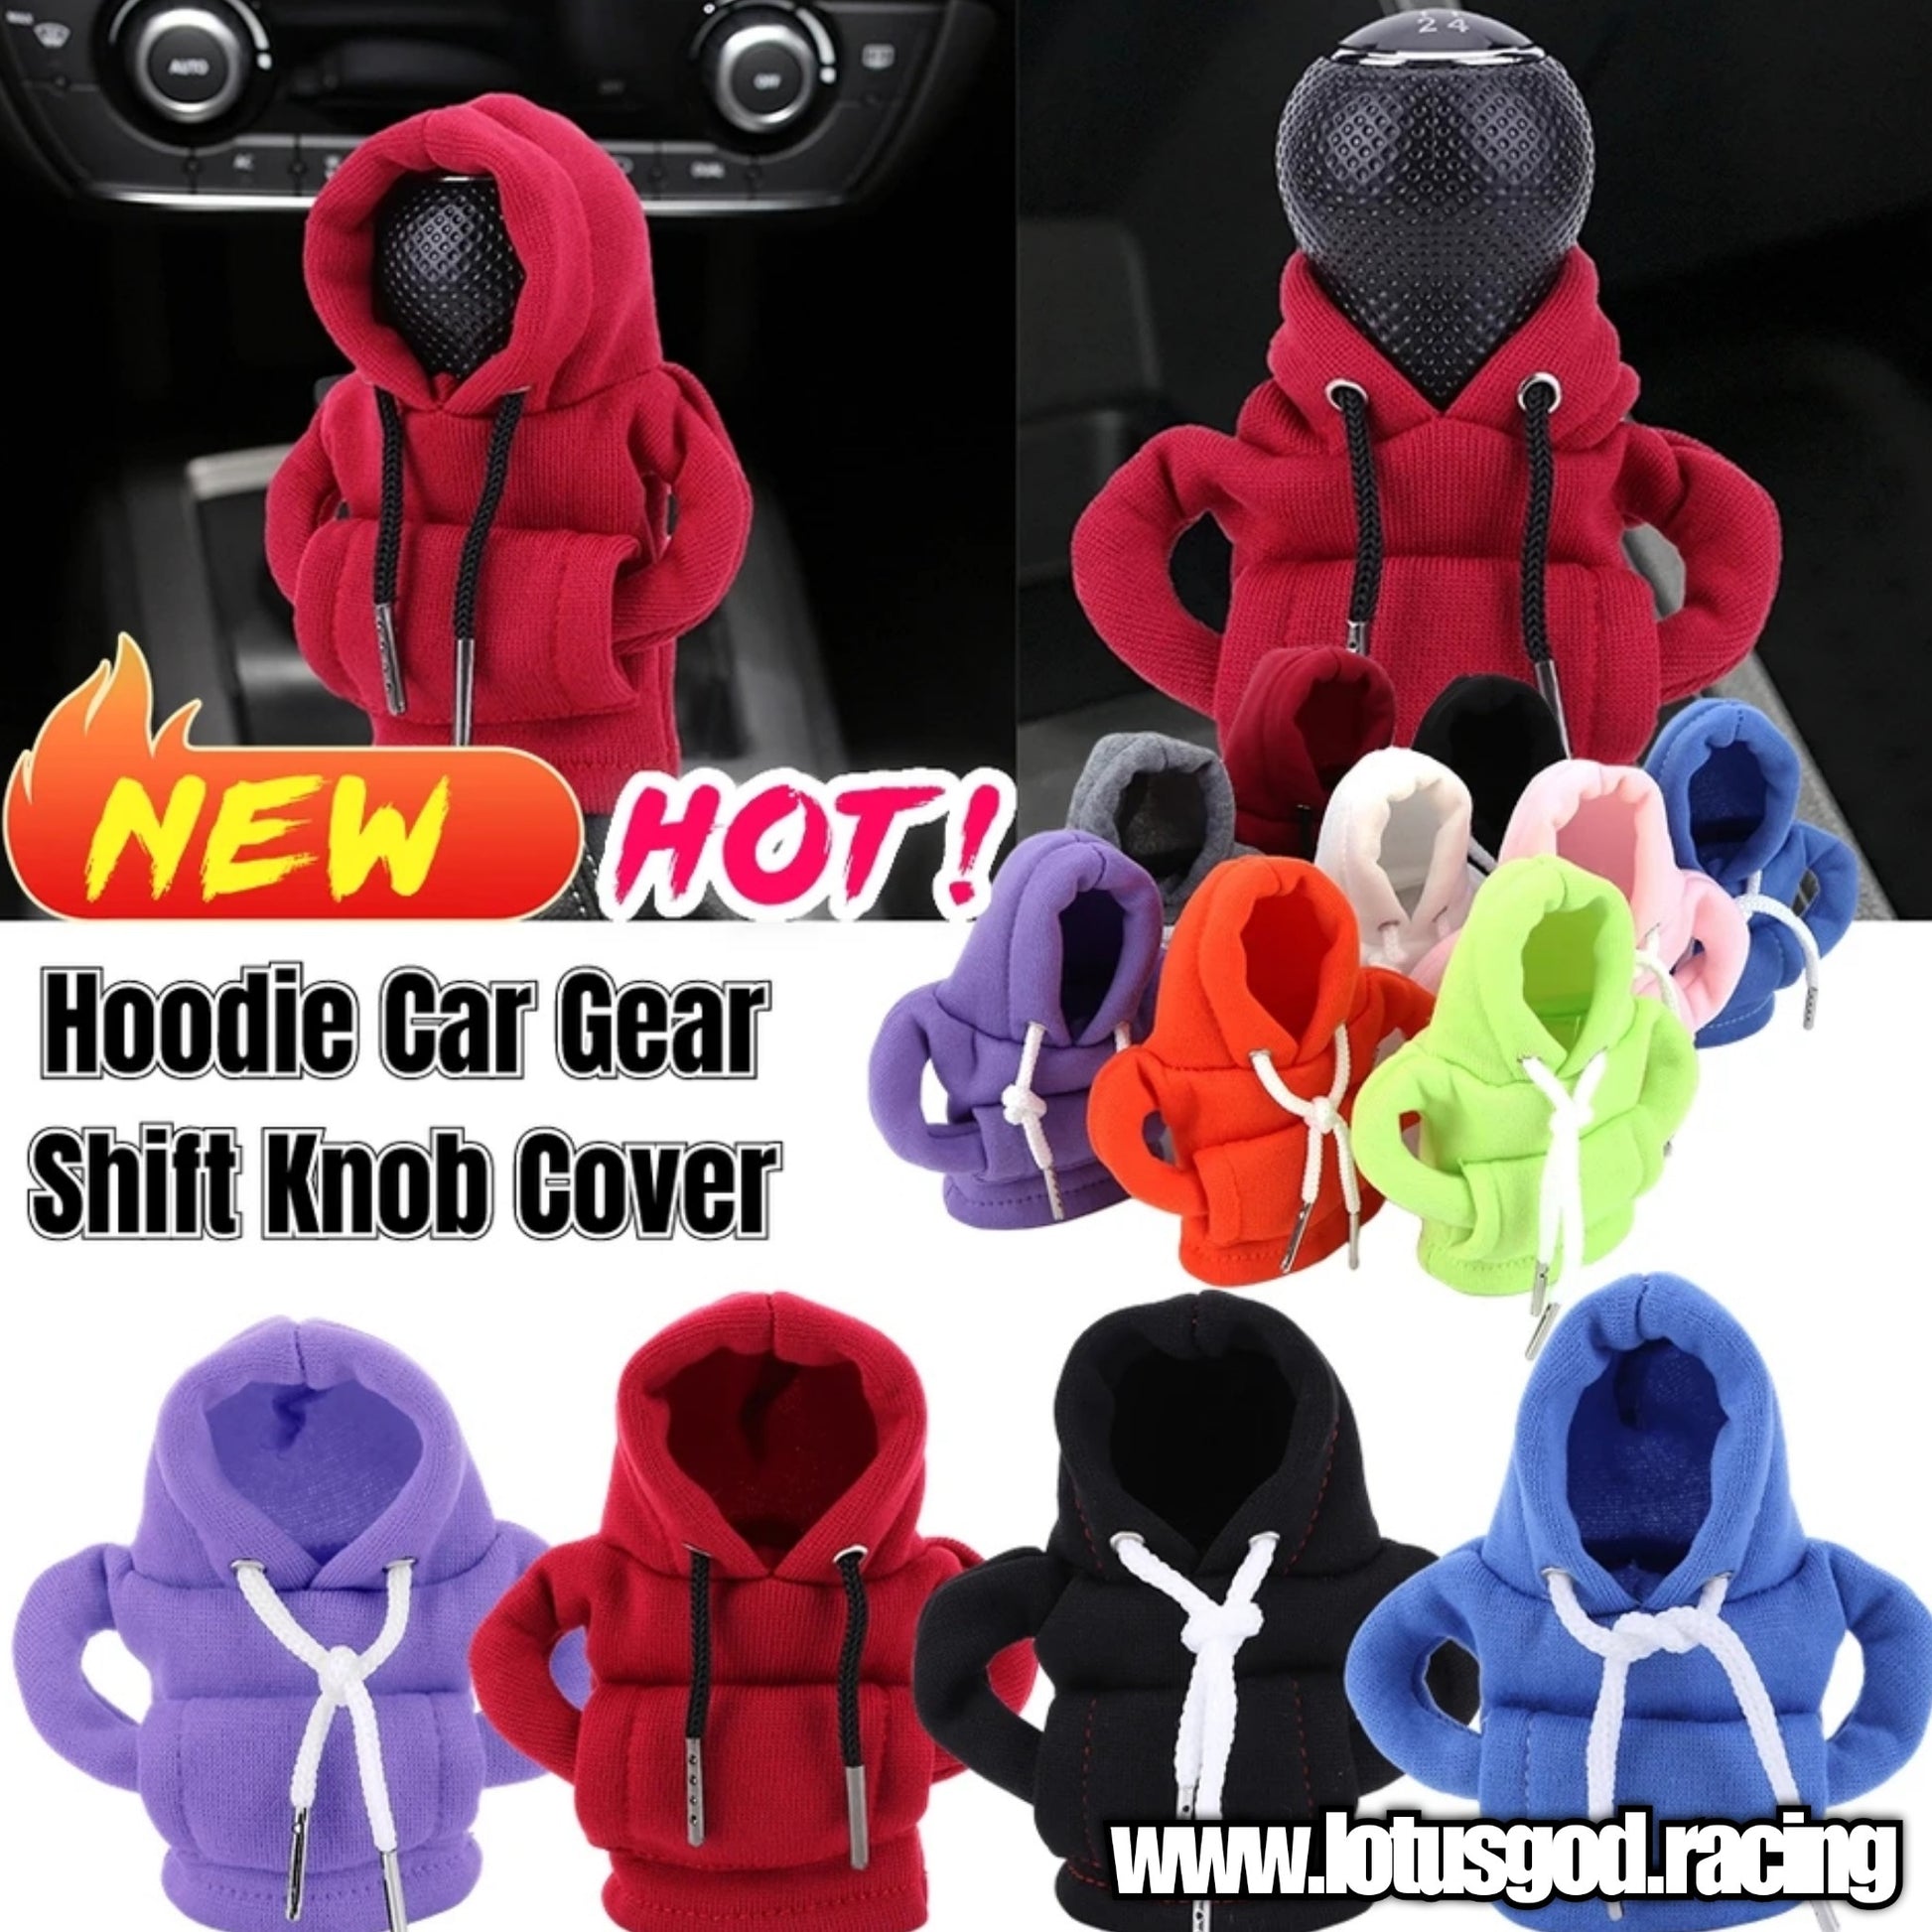 Auto Shifter Knob Cover Fashion Hoodies Gear Shifter for Car Green